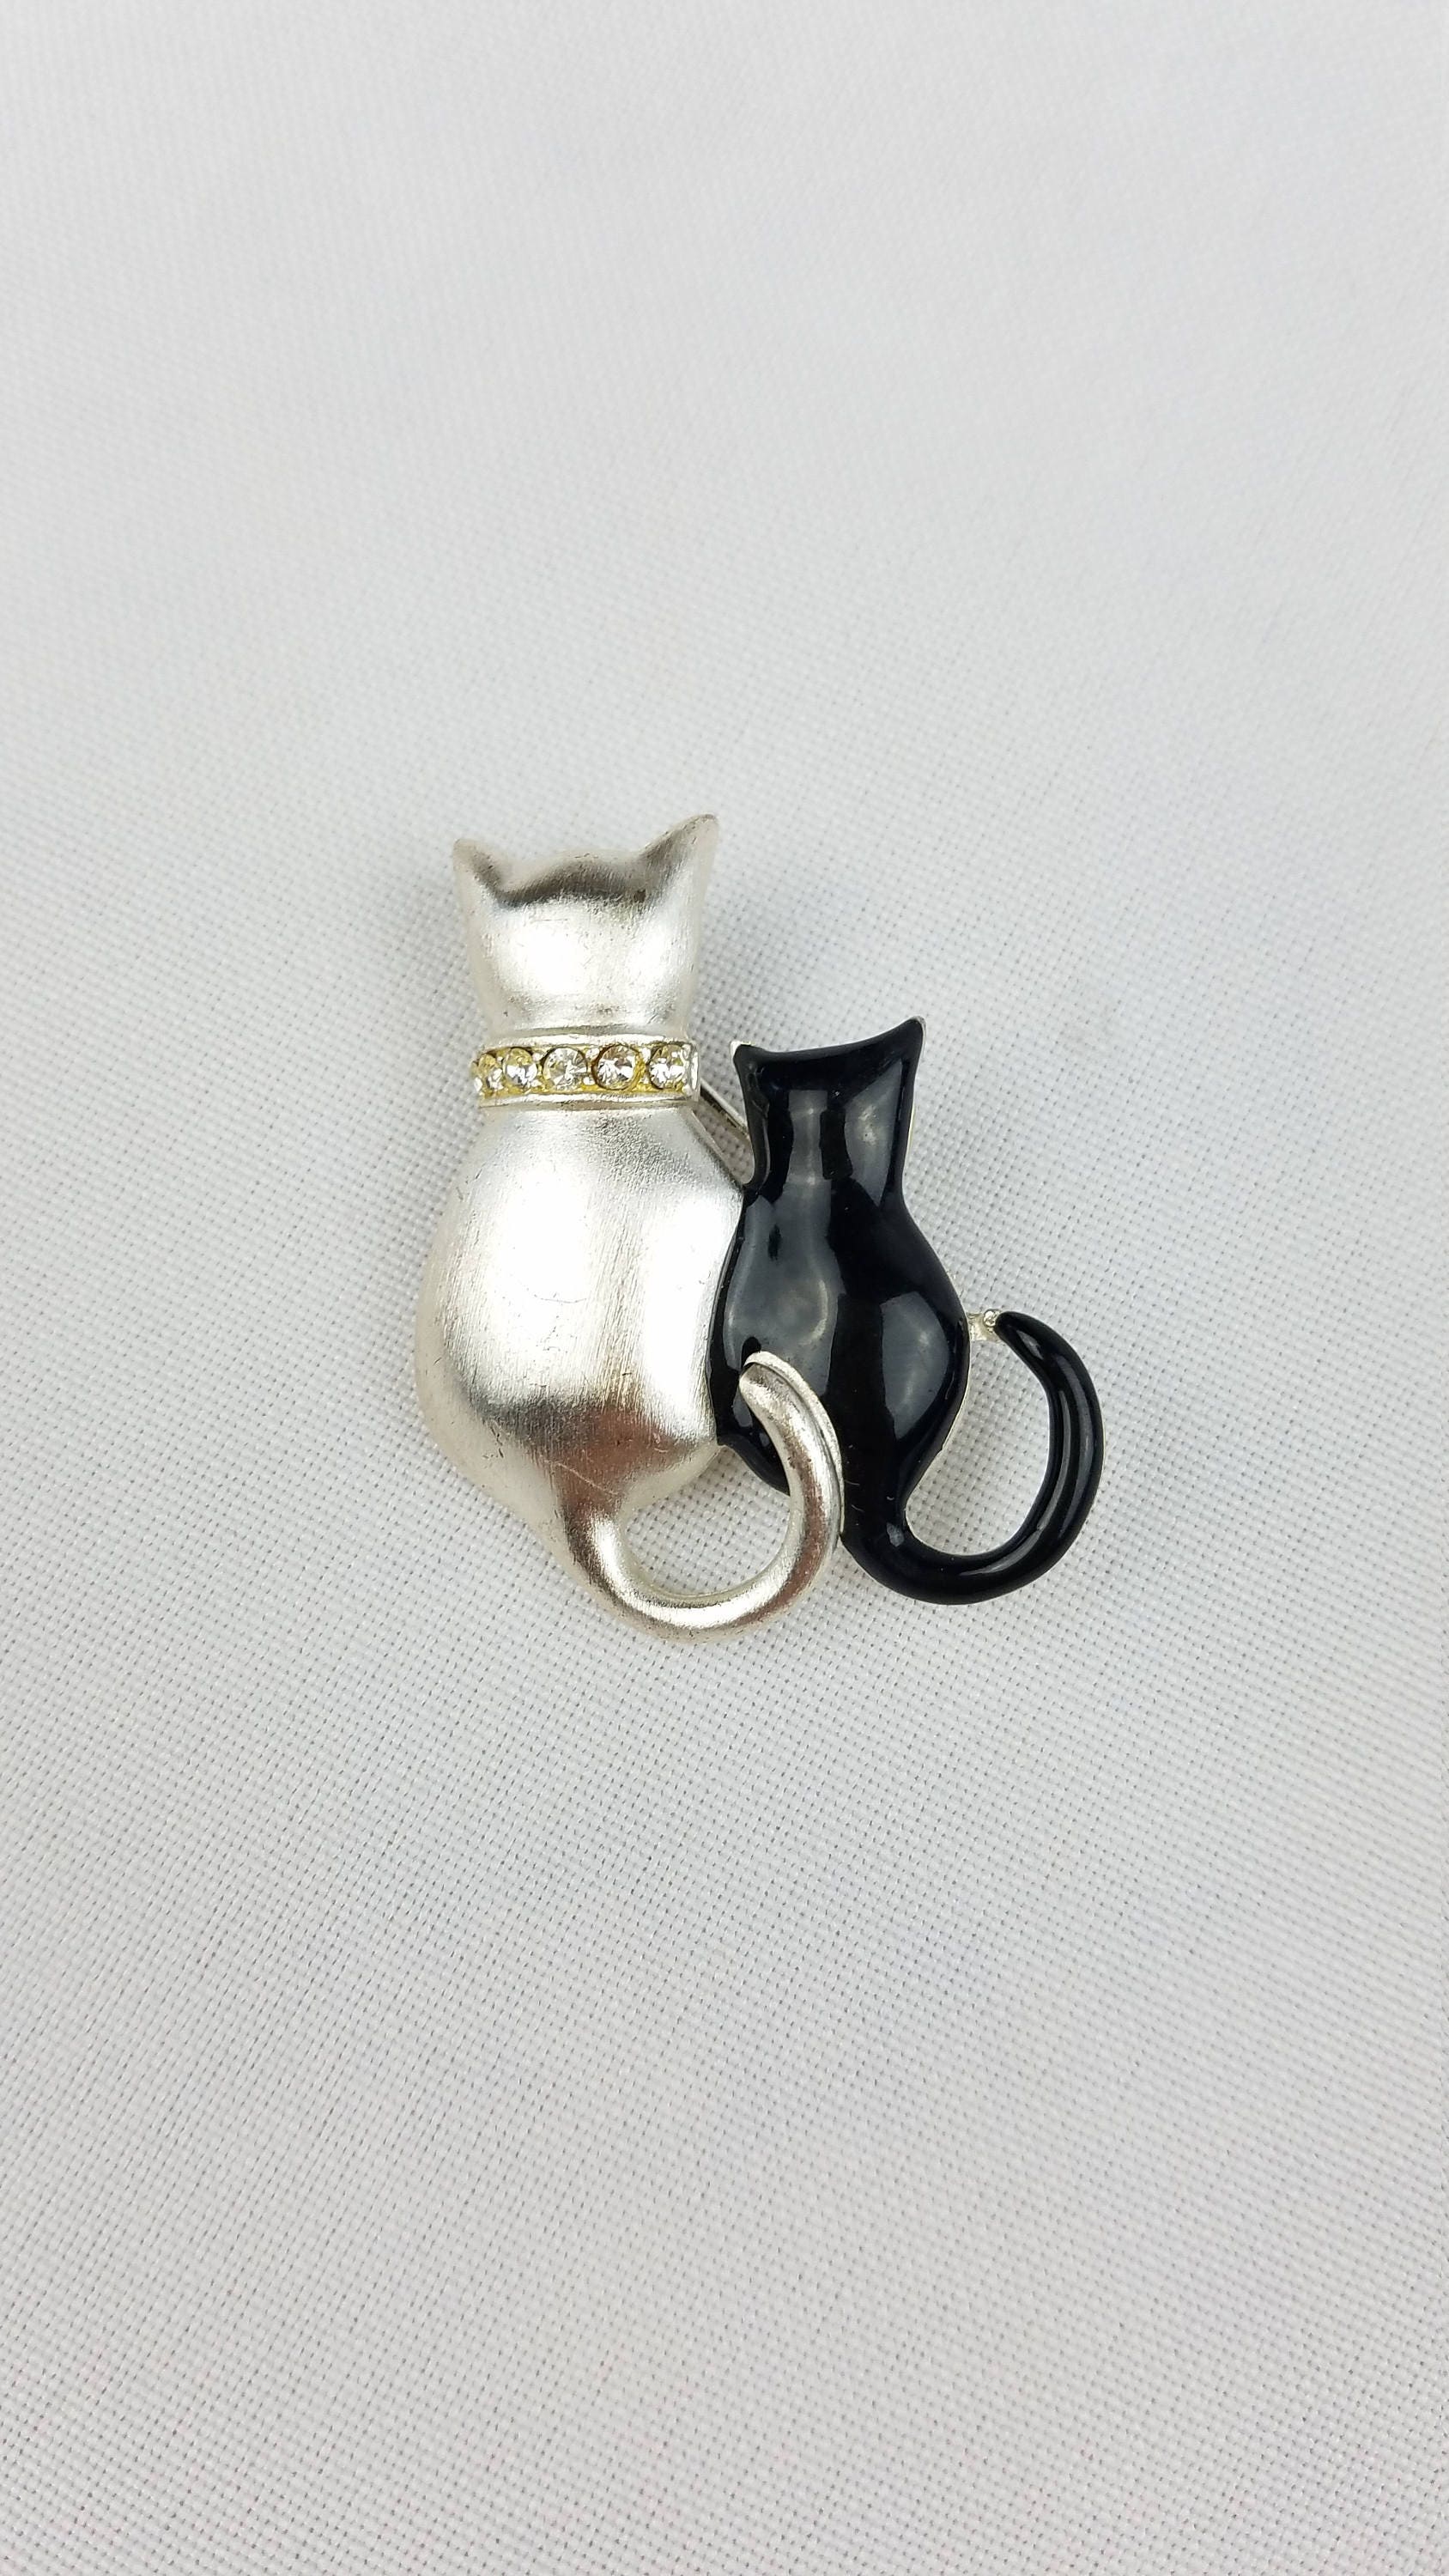 Vintage Cat Pins Two Cats Silver Stretching Cat Sleek black Cat Pair